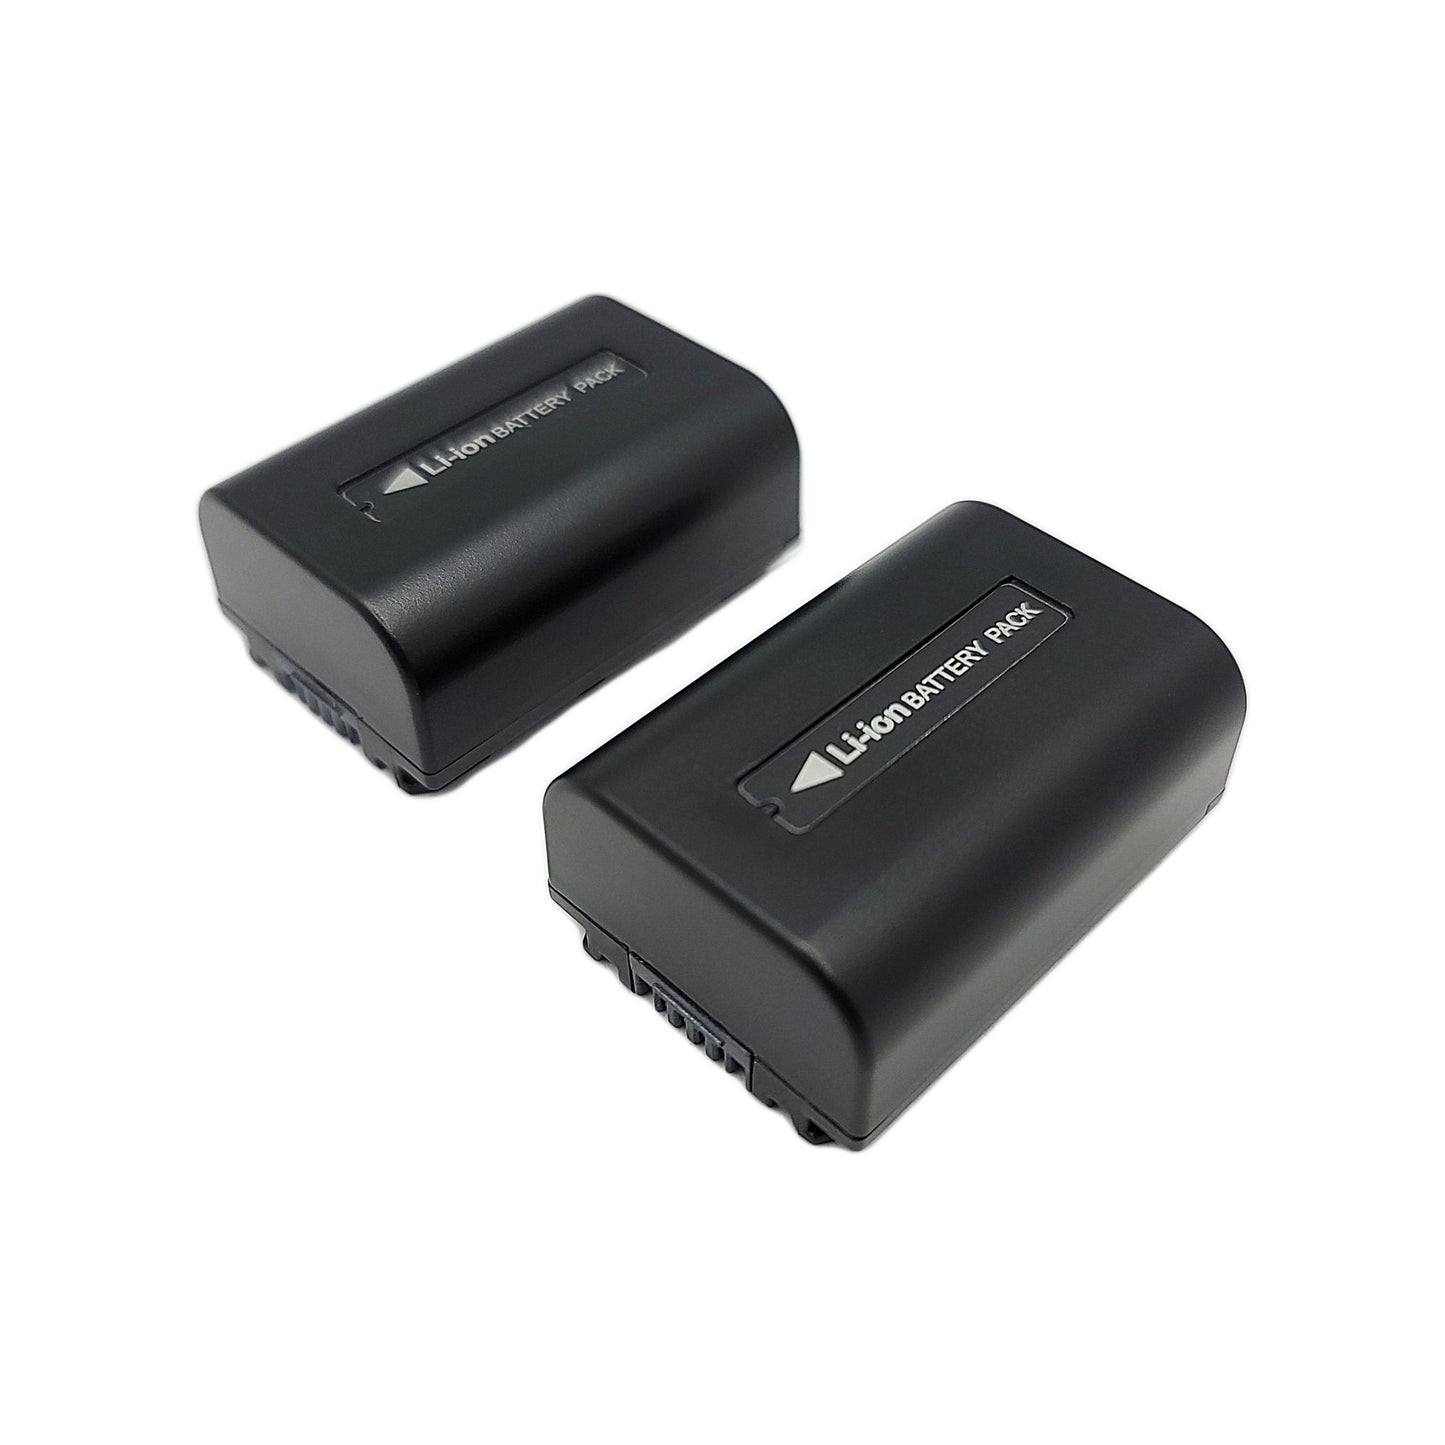 Hridz NP-FV50 Lithium-Ion Battery 2-Pack Bundle with Dual Charger for Sony